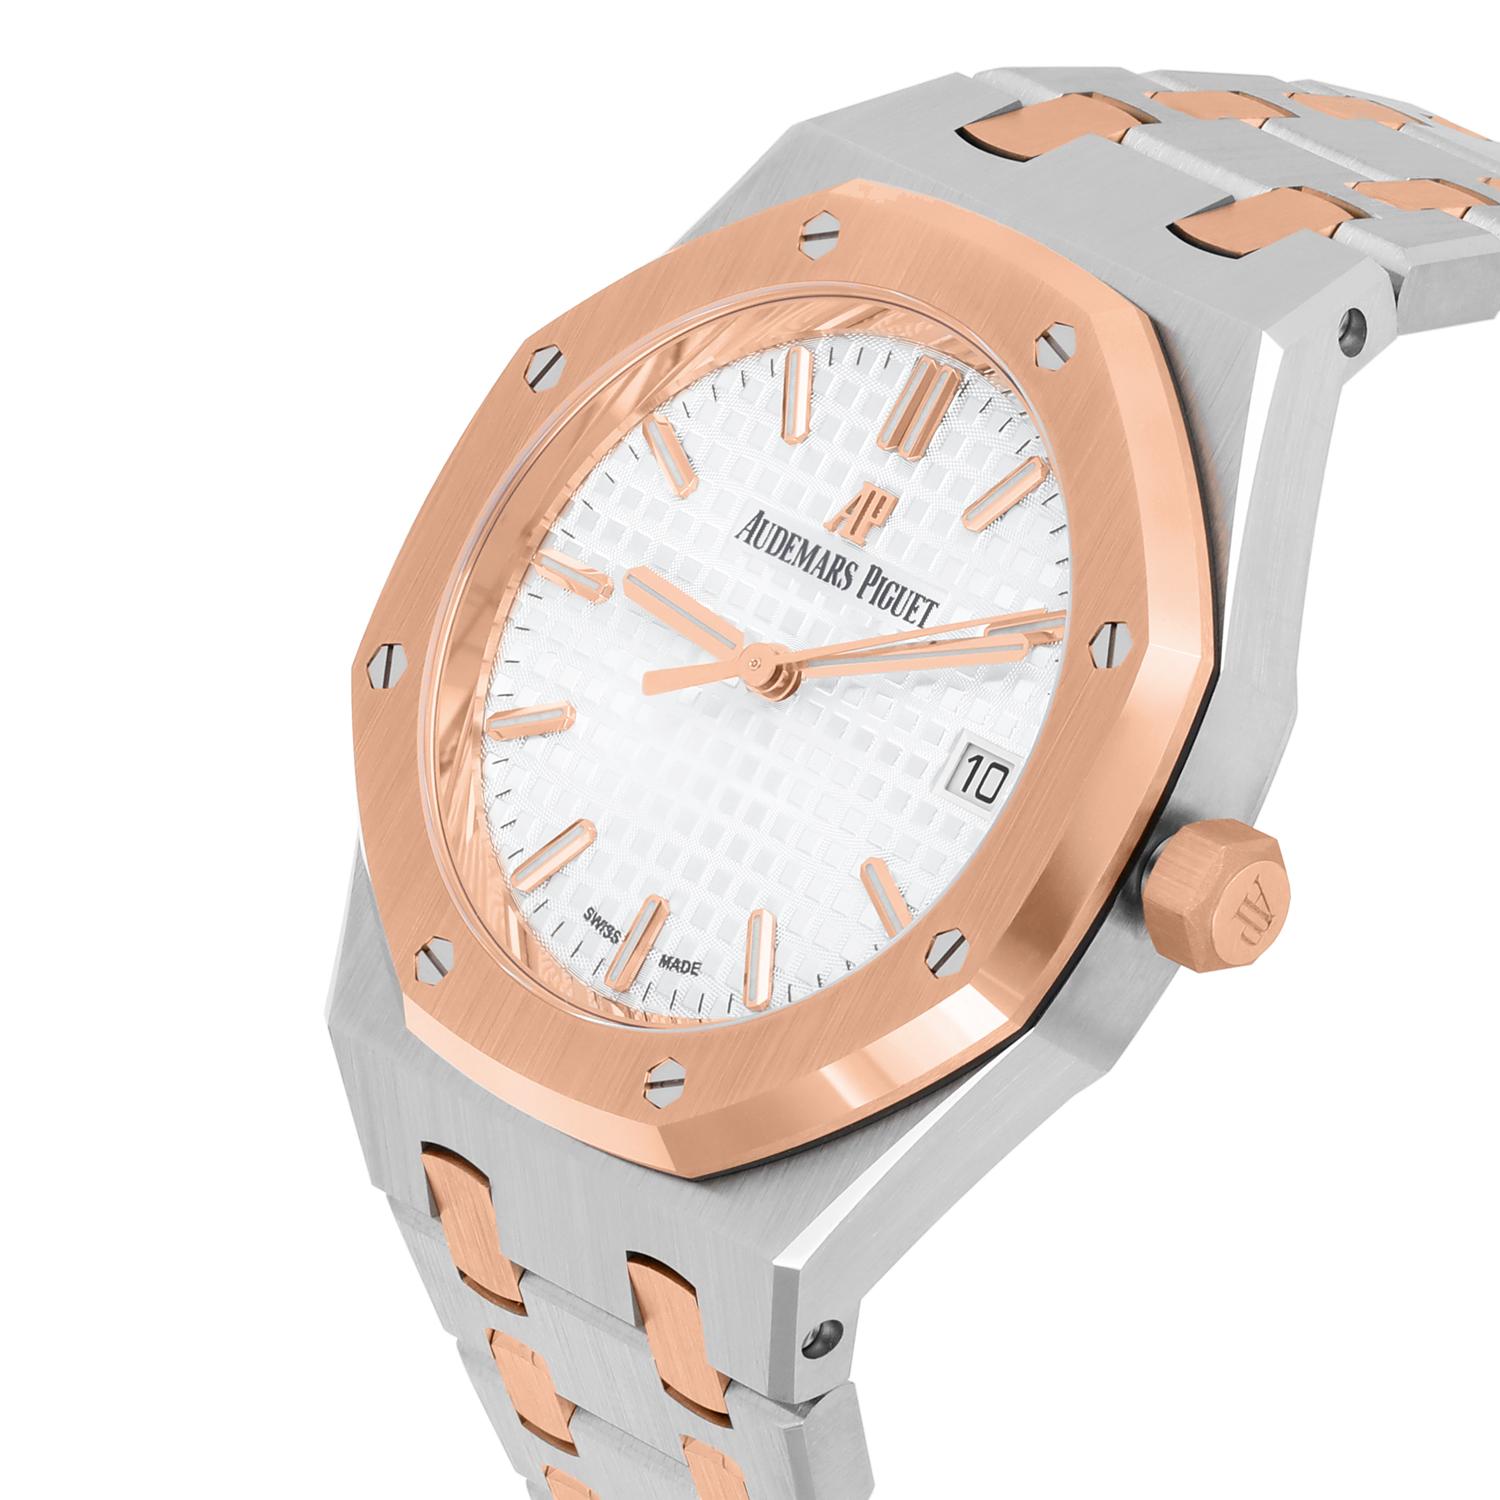 Audemars Piguet Royal Oak 34 2tone Rose Gold Women's Watch 77350SR.OO.1261SR.01 In New Condition For Sale In New York, NY